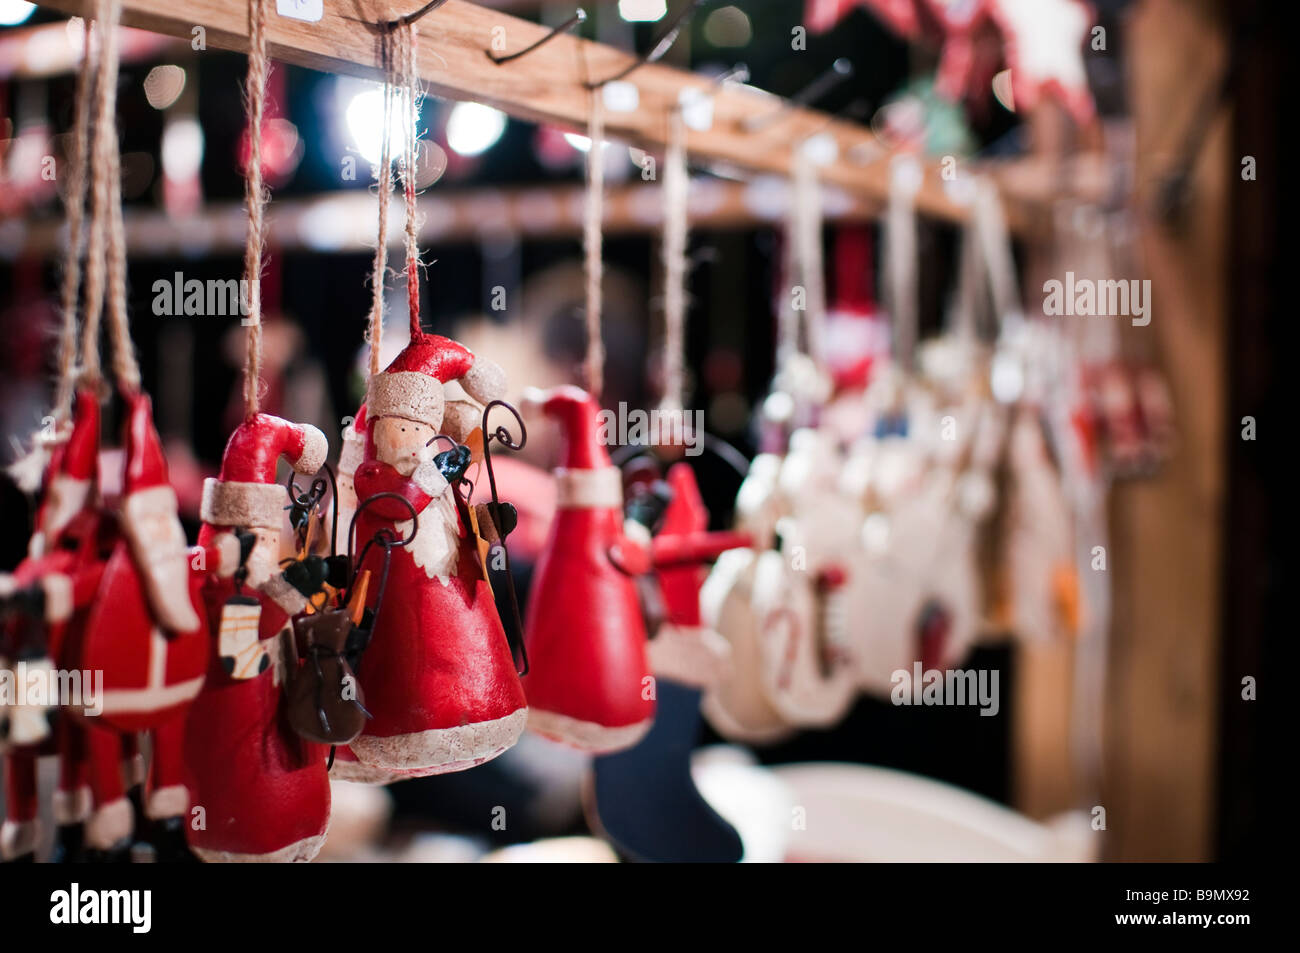 Handcrafted Santa Claus figures in the Strasbourg Christmas Market, known as the largest in France. Stock Photo